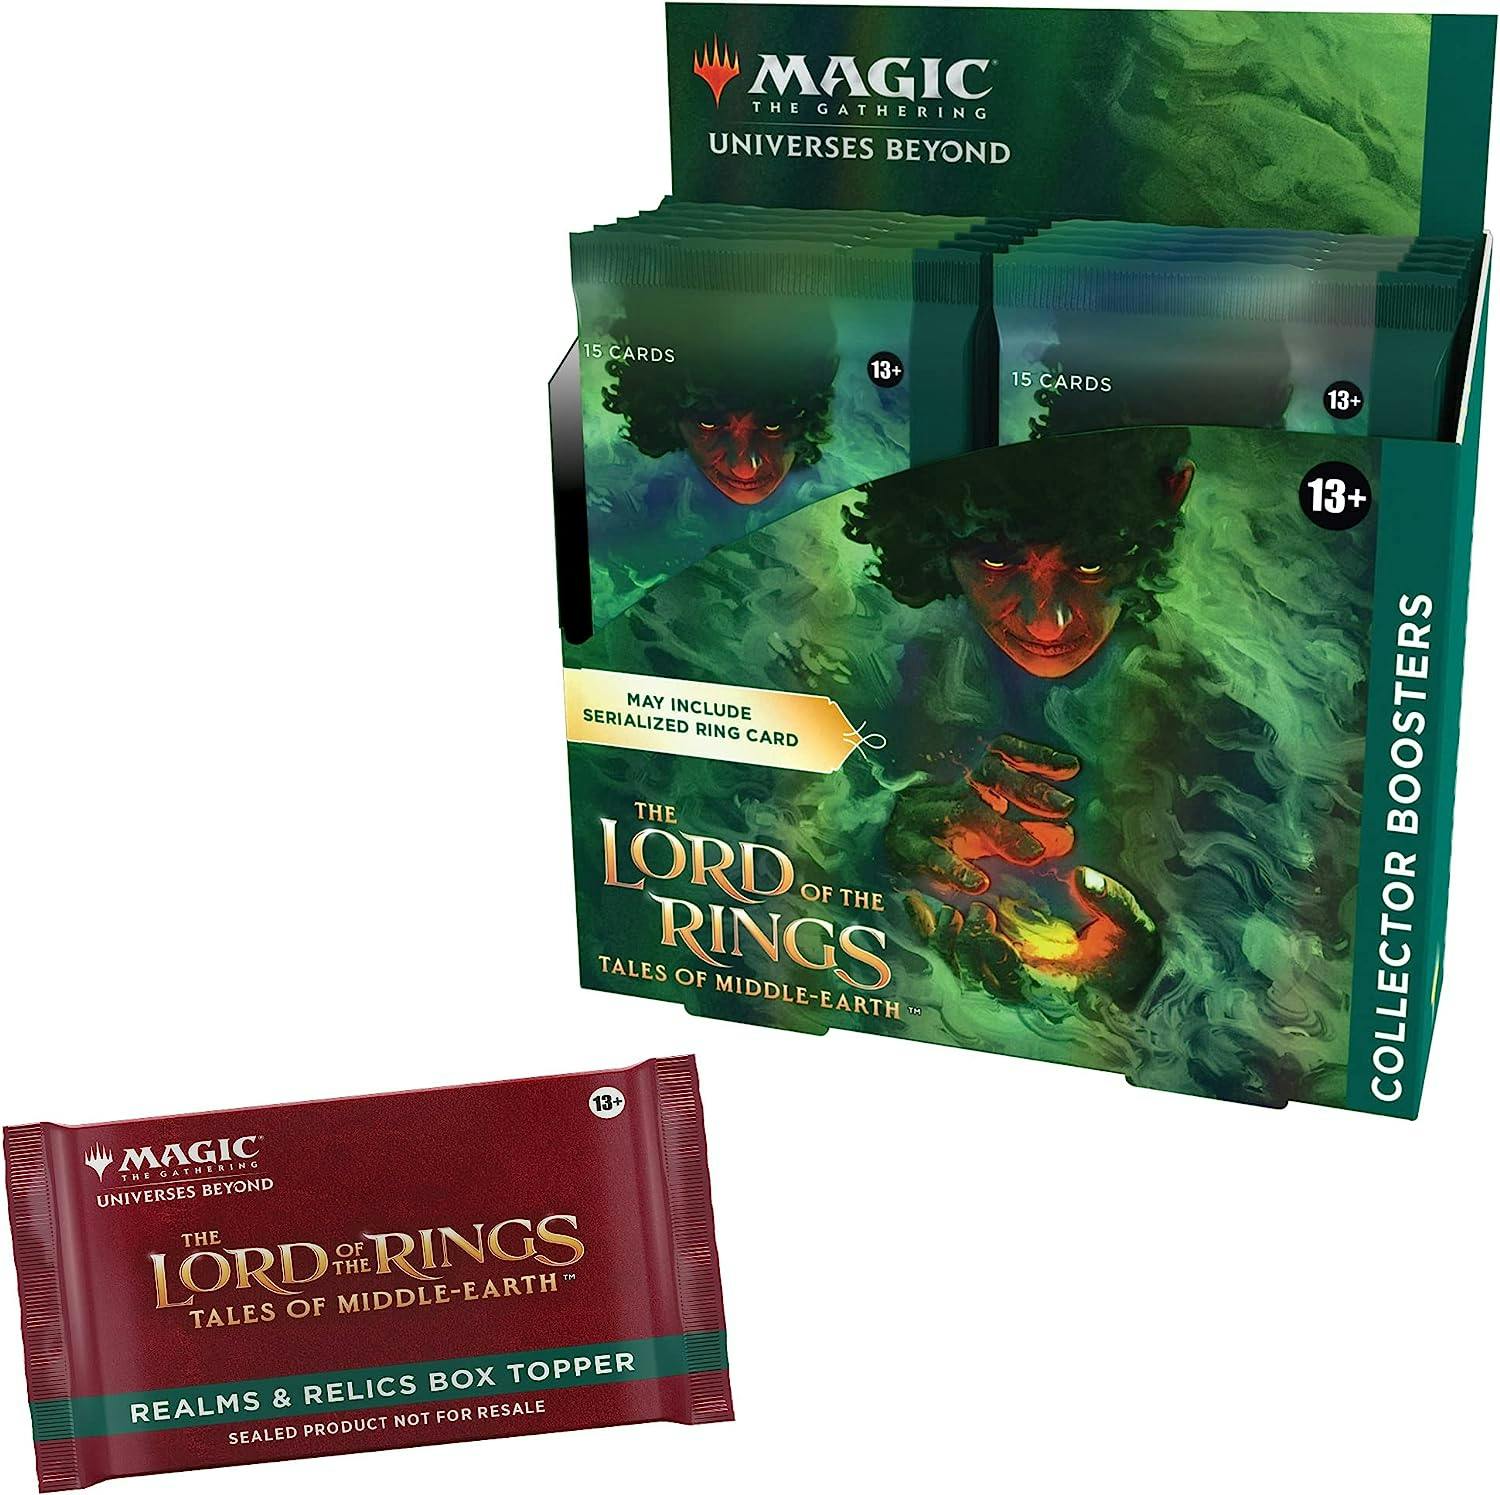 Magic The Gathering: The Lord of The Rings: Tales of Middle-Earth - Collector Booster Box - 712YBn7C0nL._AC_SL1500